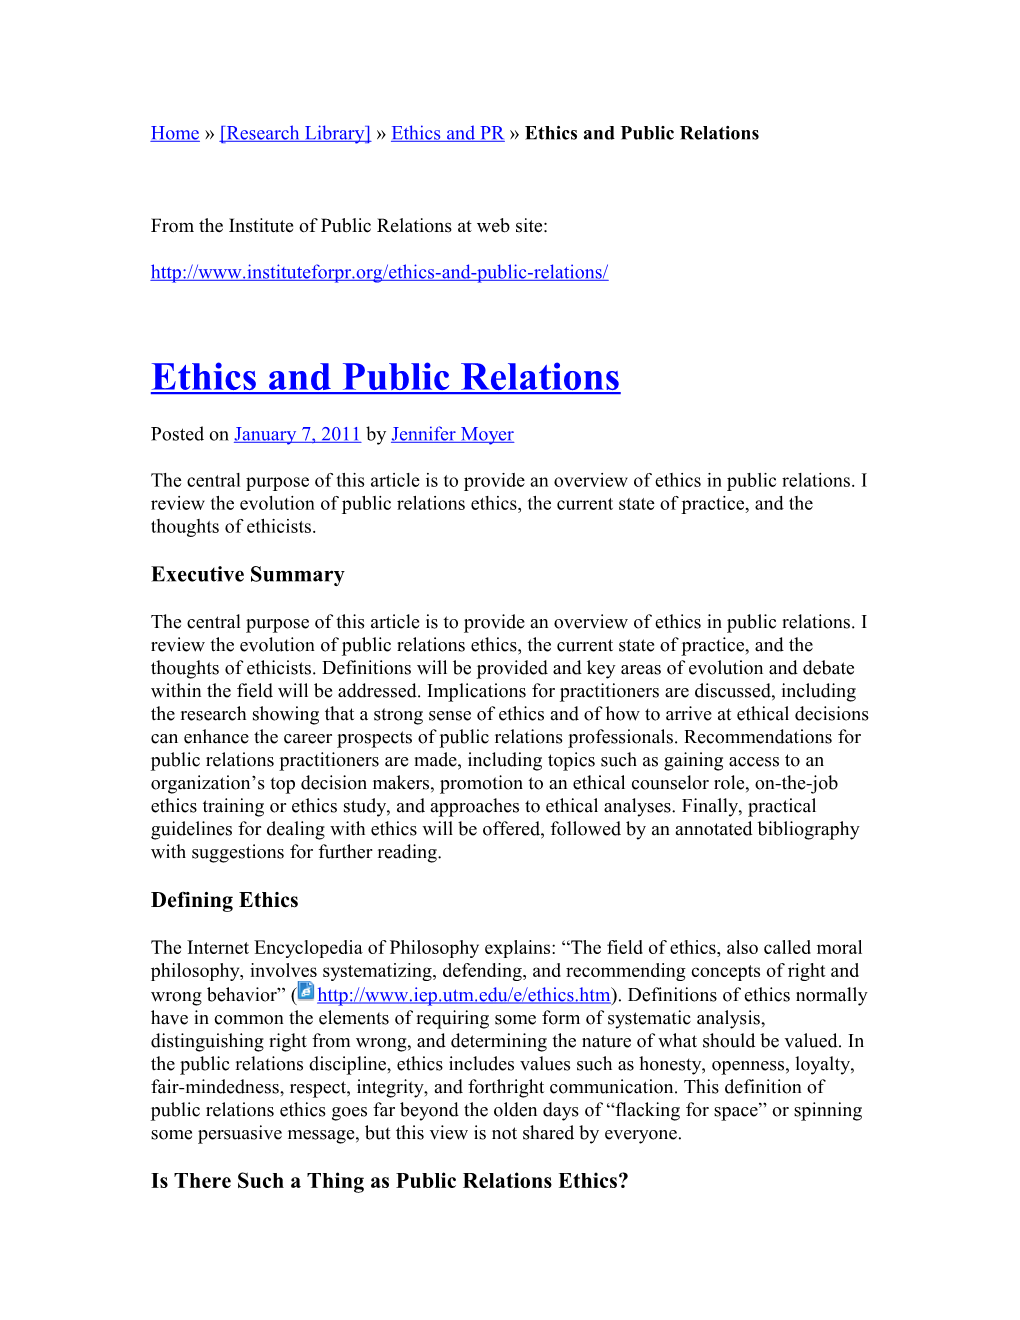 Home Research Library Ethics and PR Ethics and Public Relations